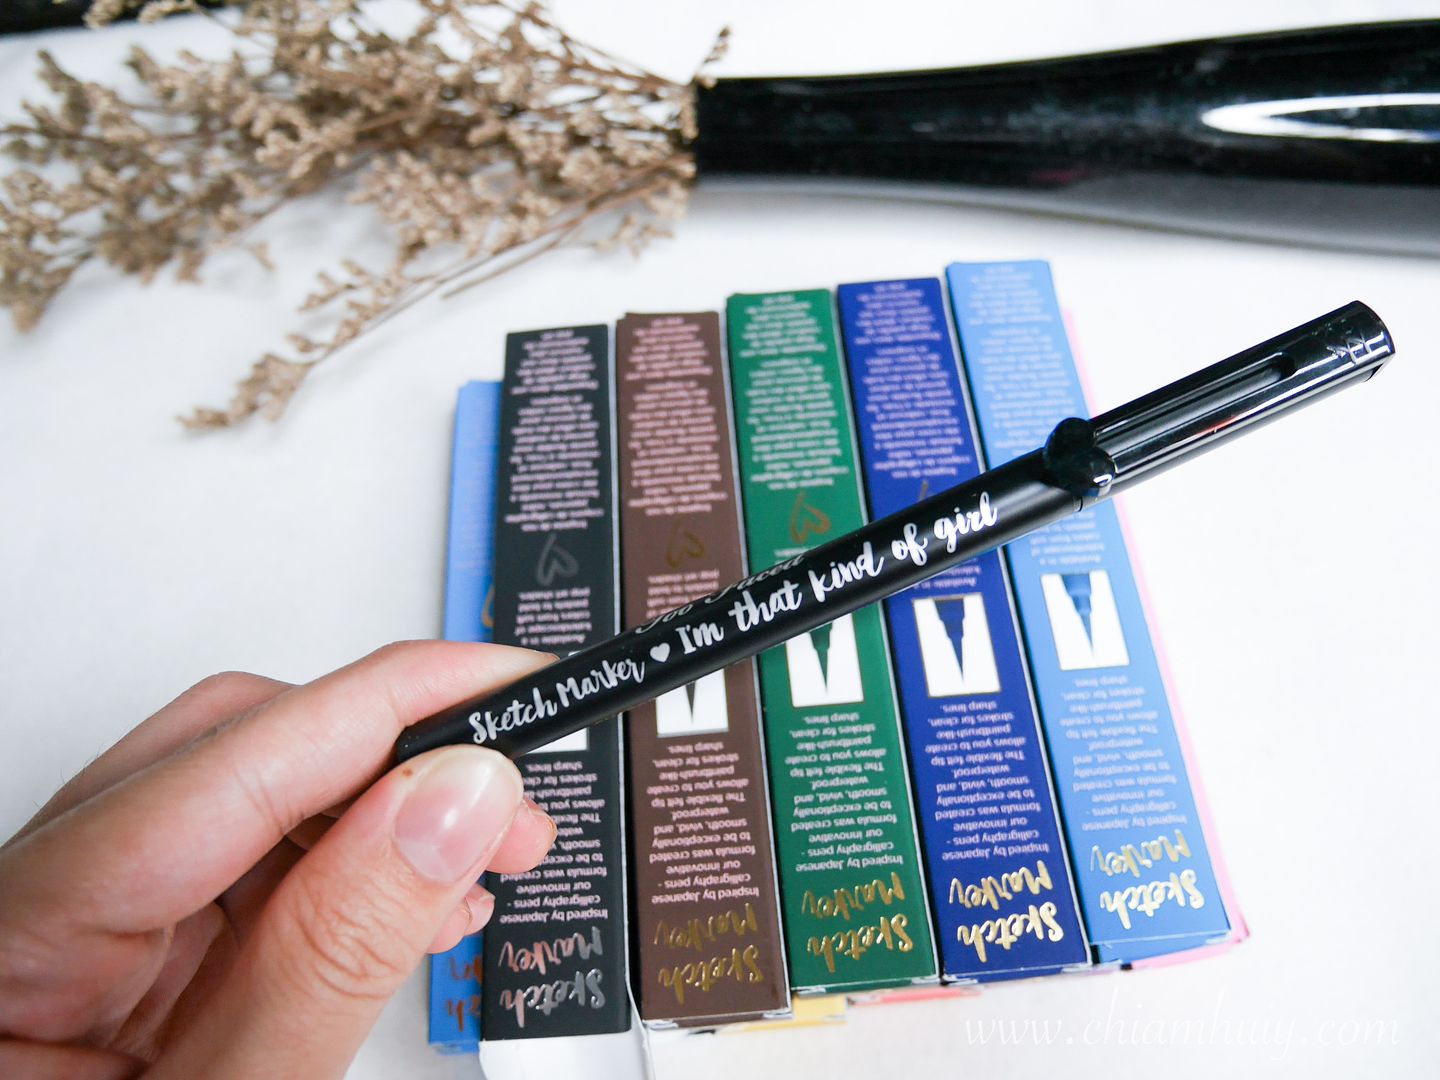  photo toofaced sketchmarkers singapore_2_zpsuxhqllm9.jpg